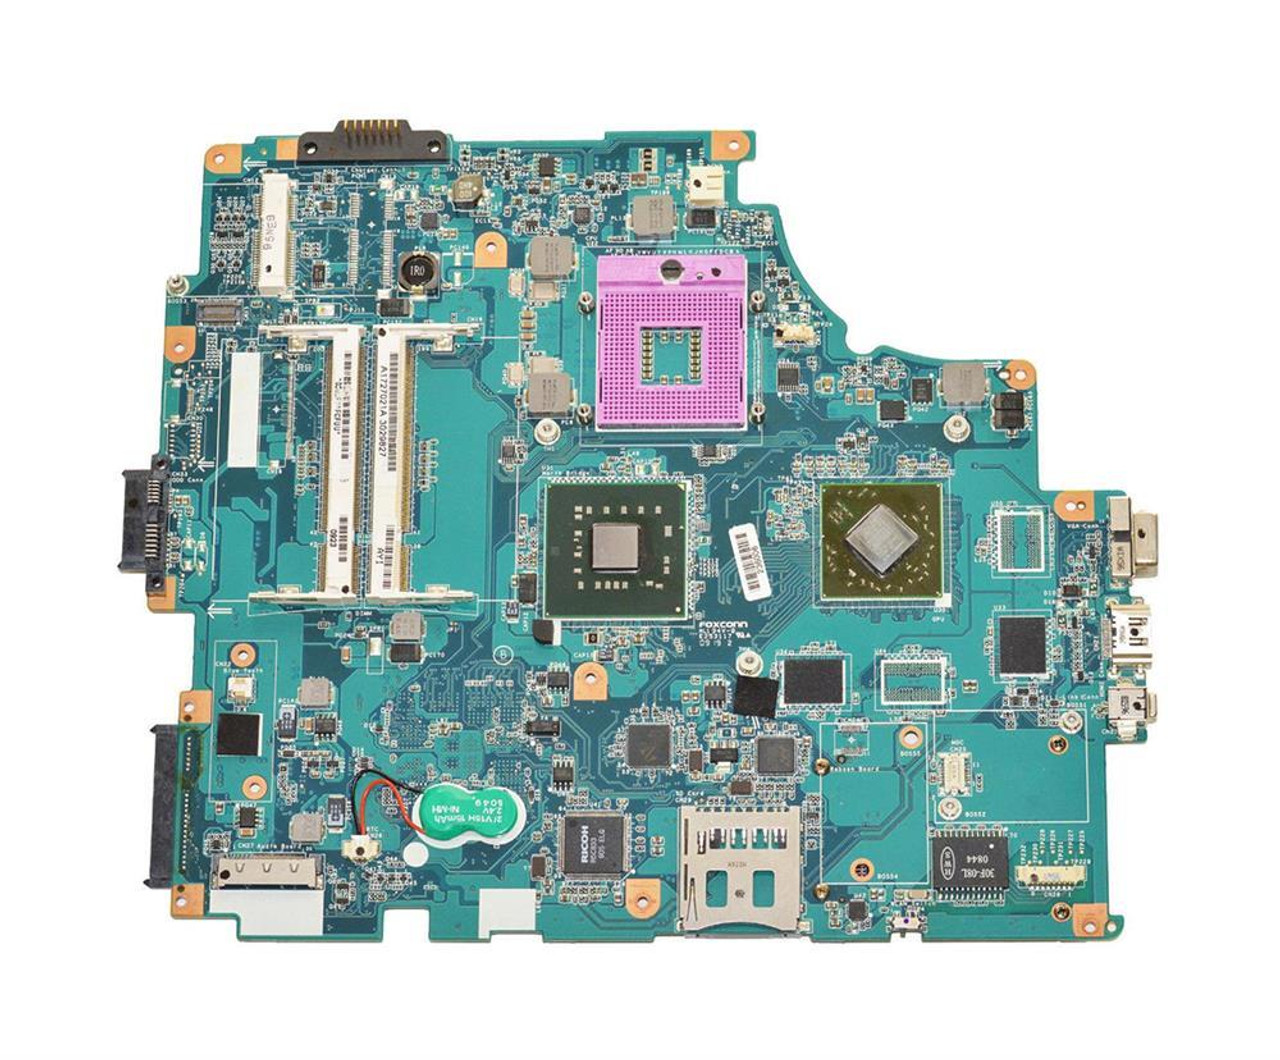 A1553546A SONY VIAO FW-Series Intel Motherboard ATI MBX-189 (Refurbished)